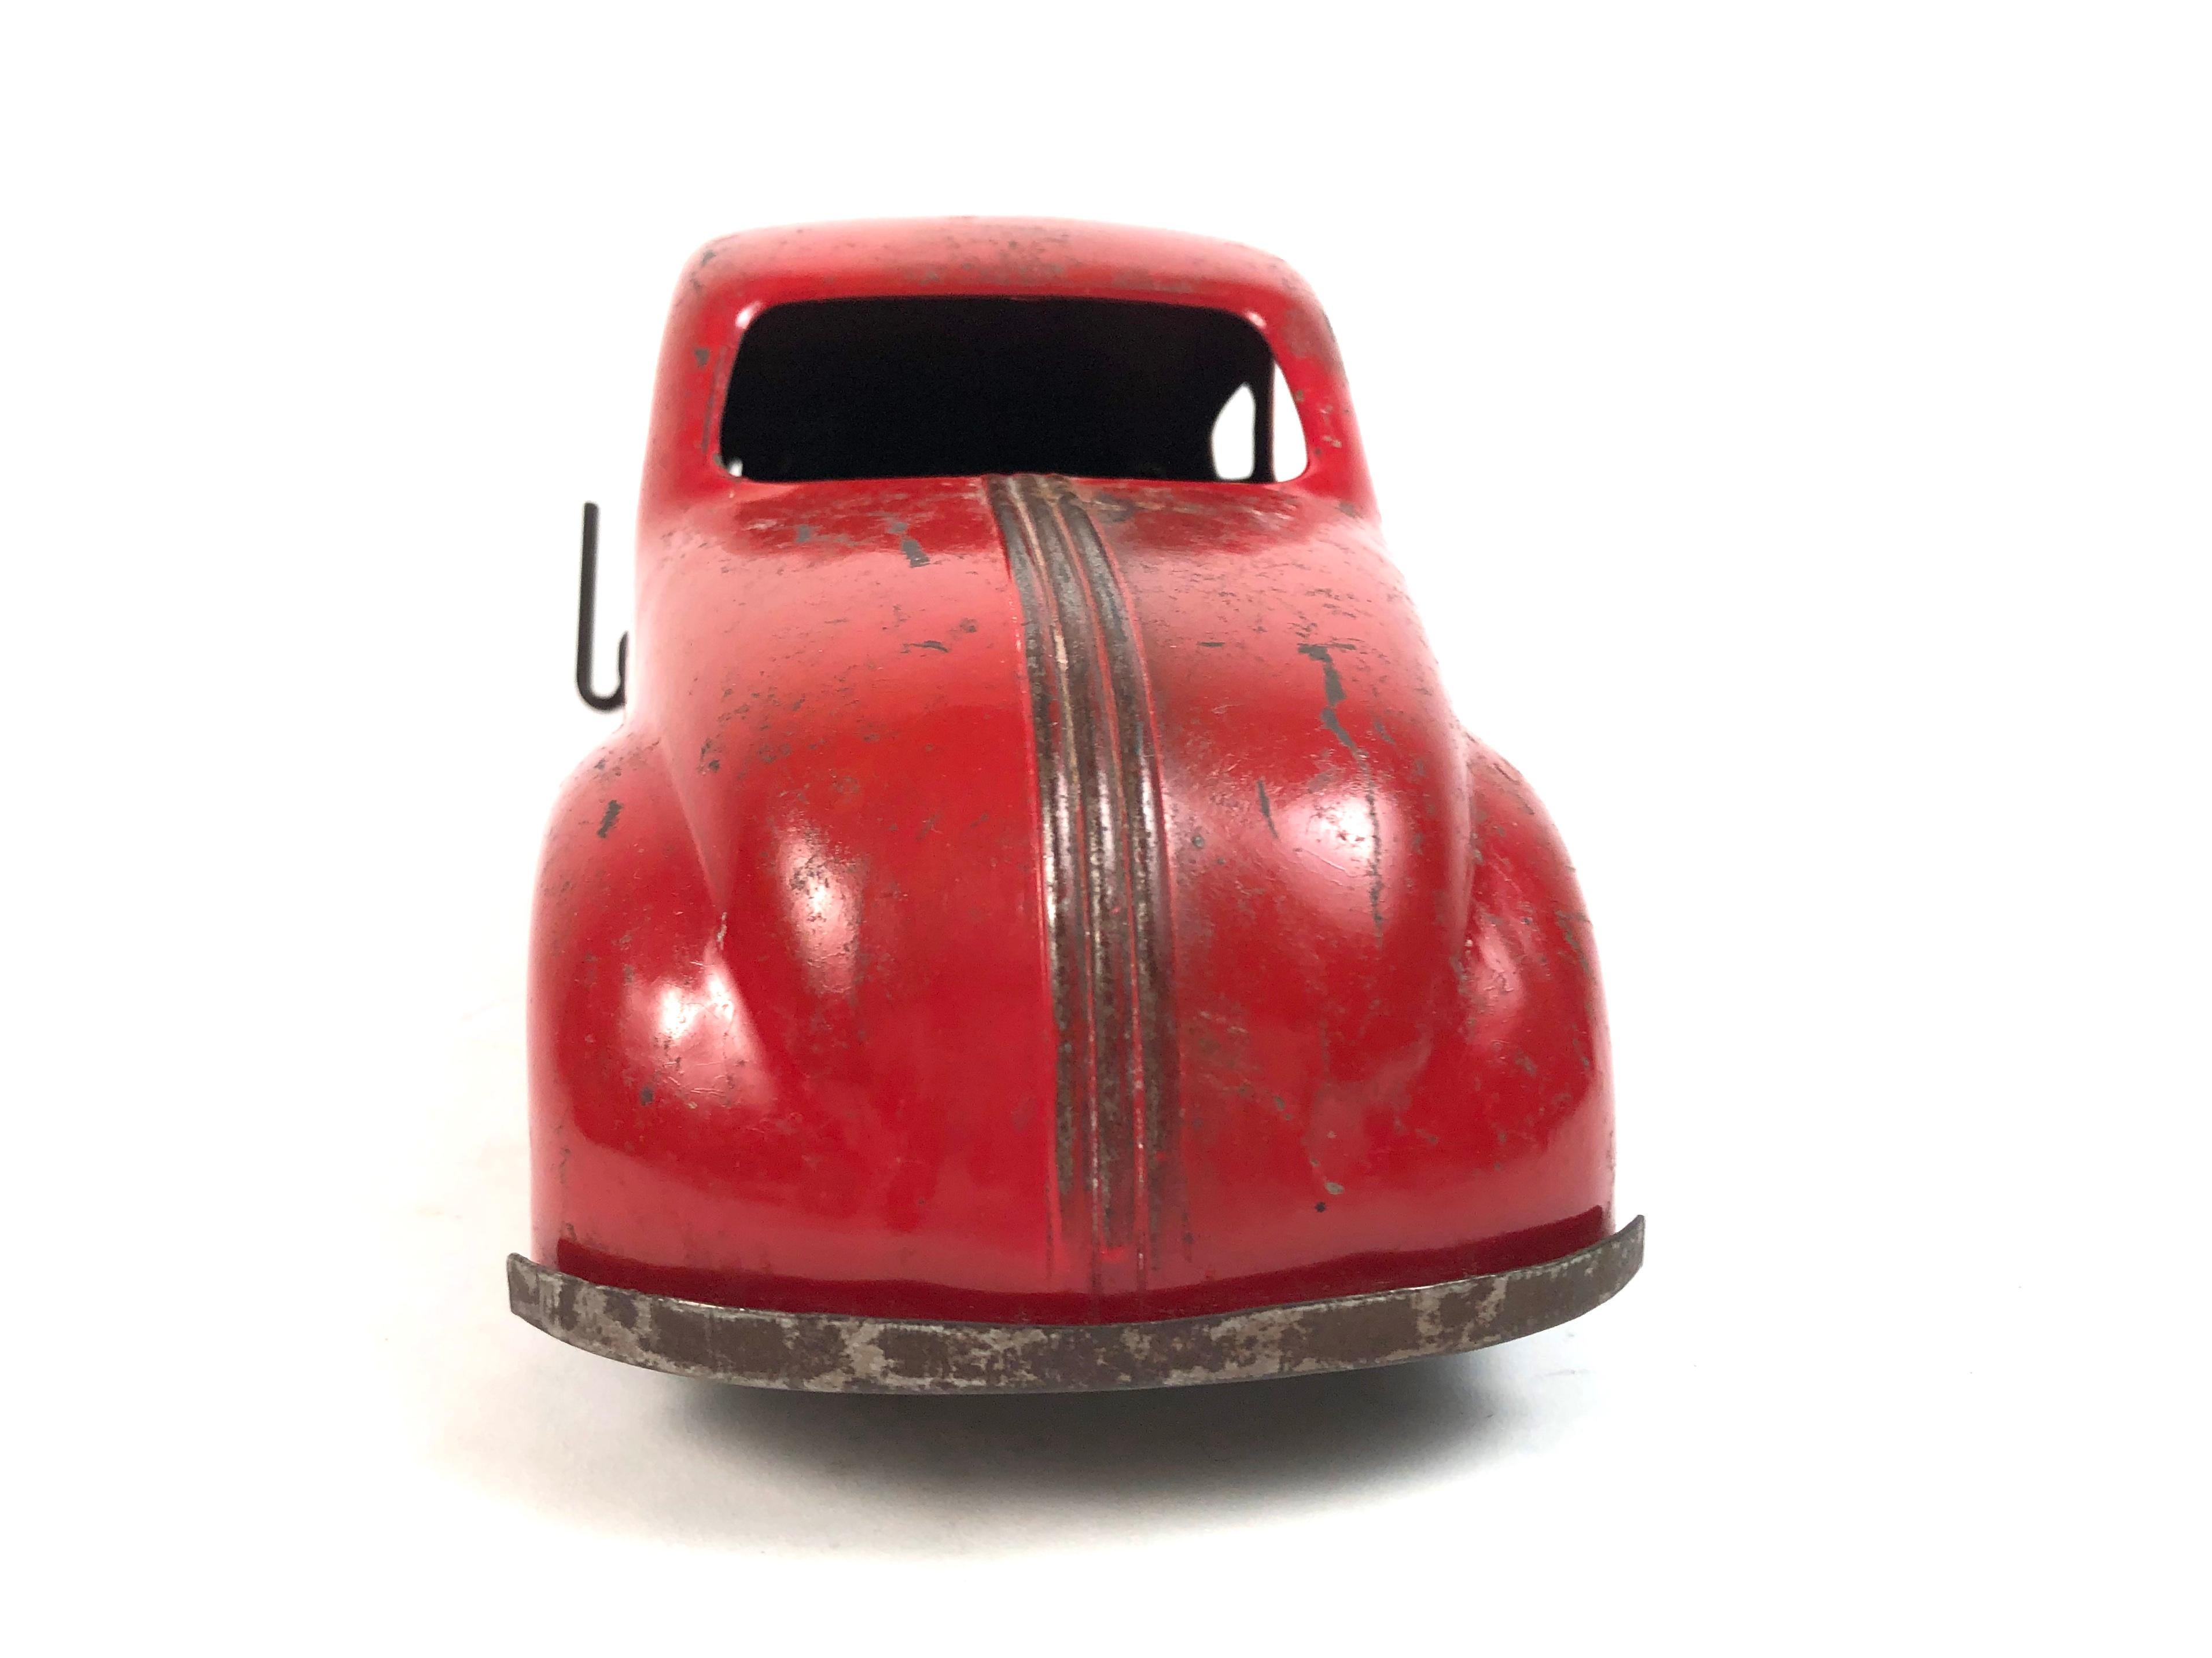 1930s metal toy cars